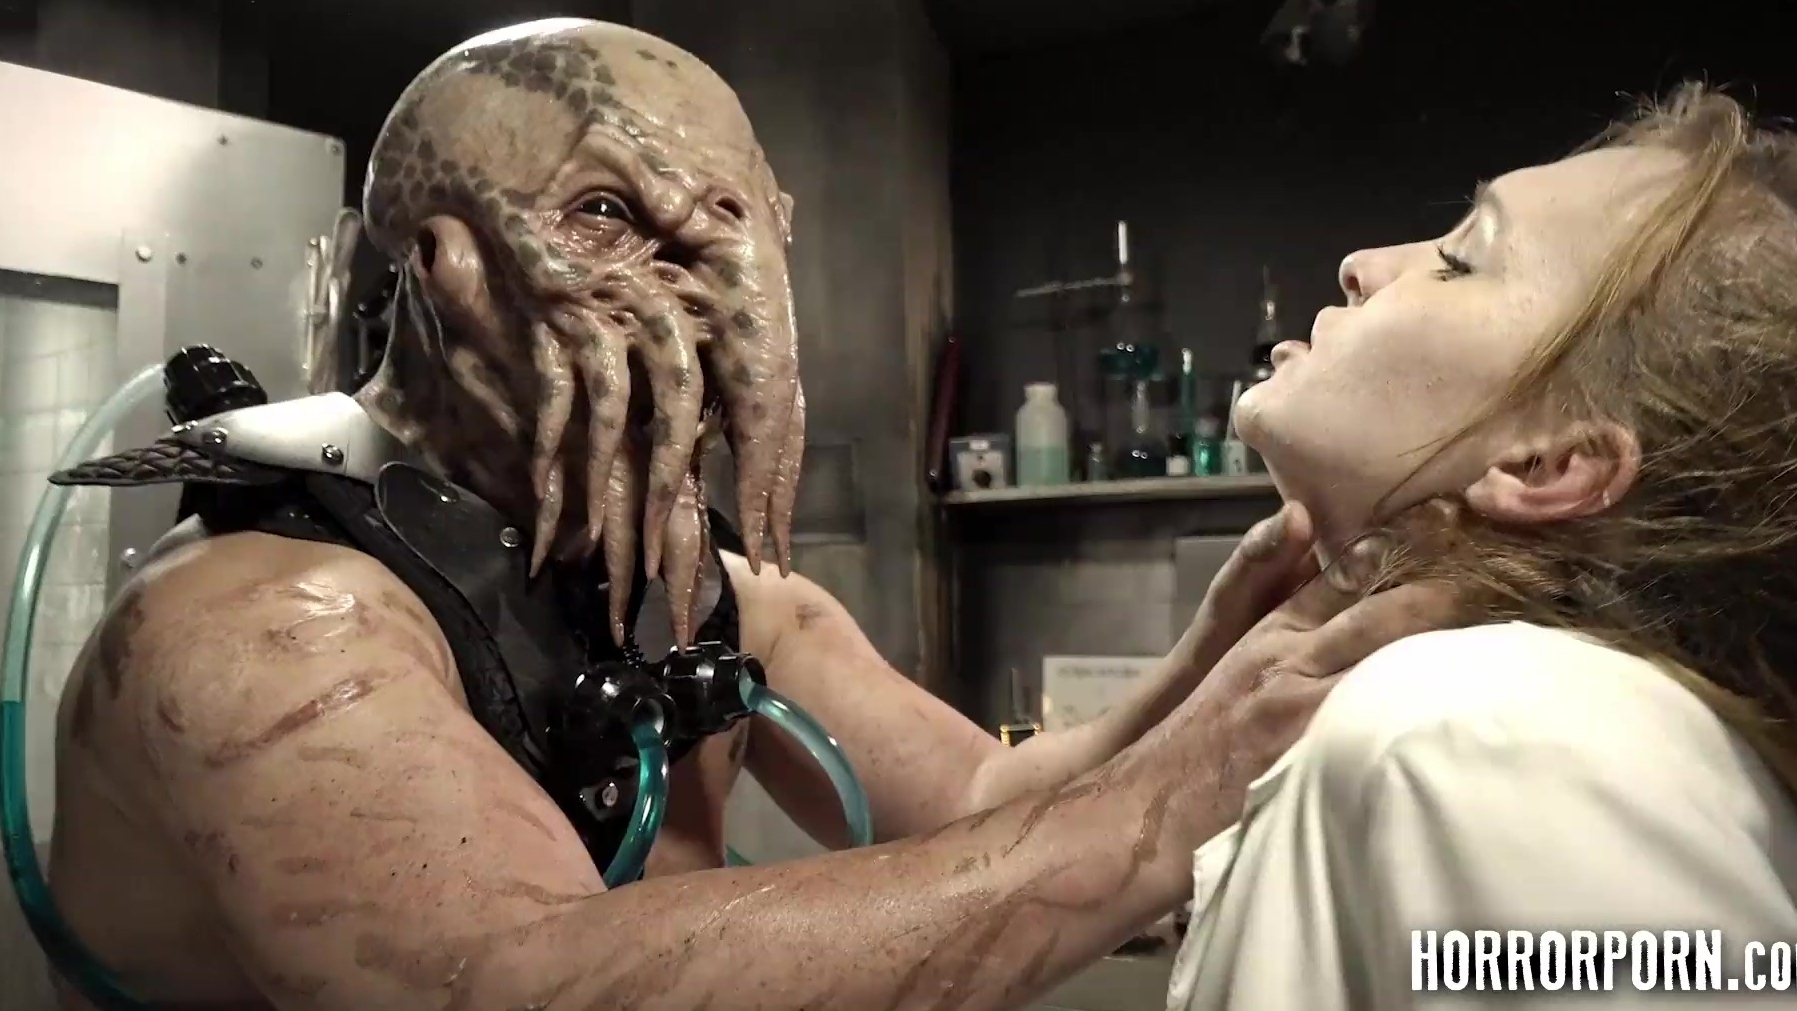 Horror Porn Movie Resurrected Cthulhu With Erected Dick Fucks Beautiful Seductive Doctor Bell Claire